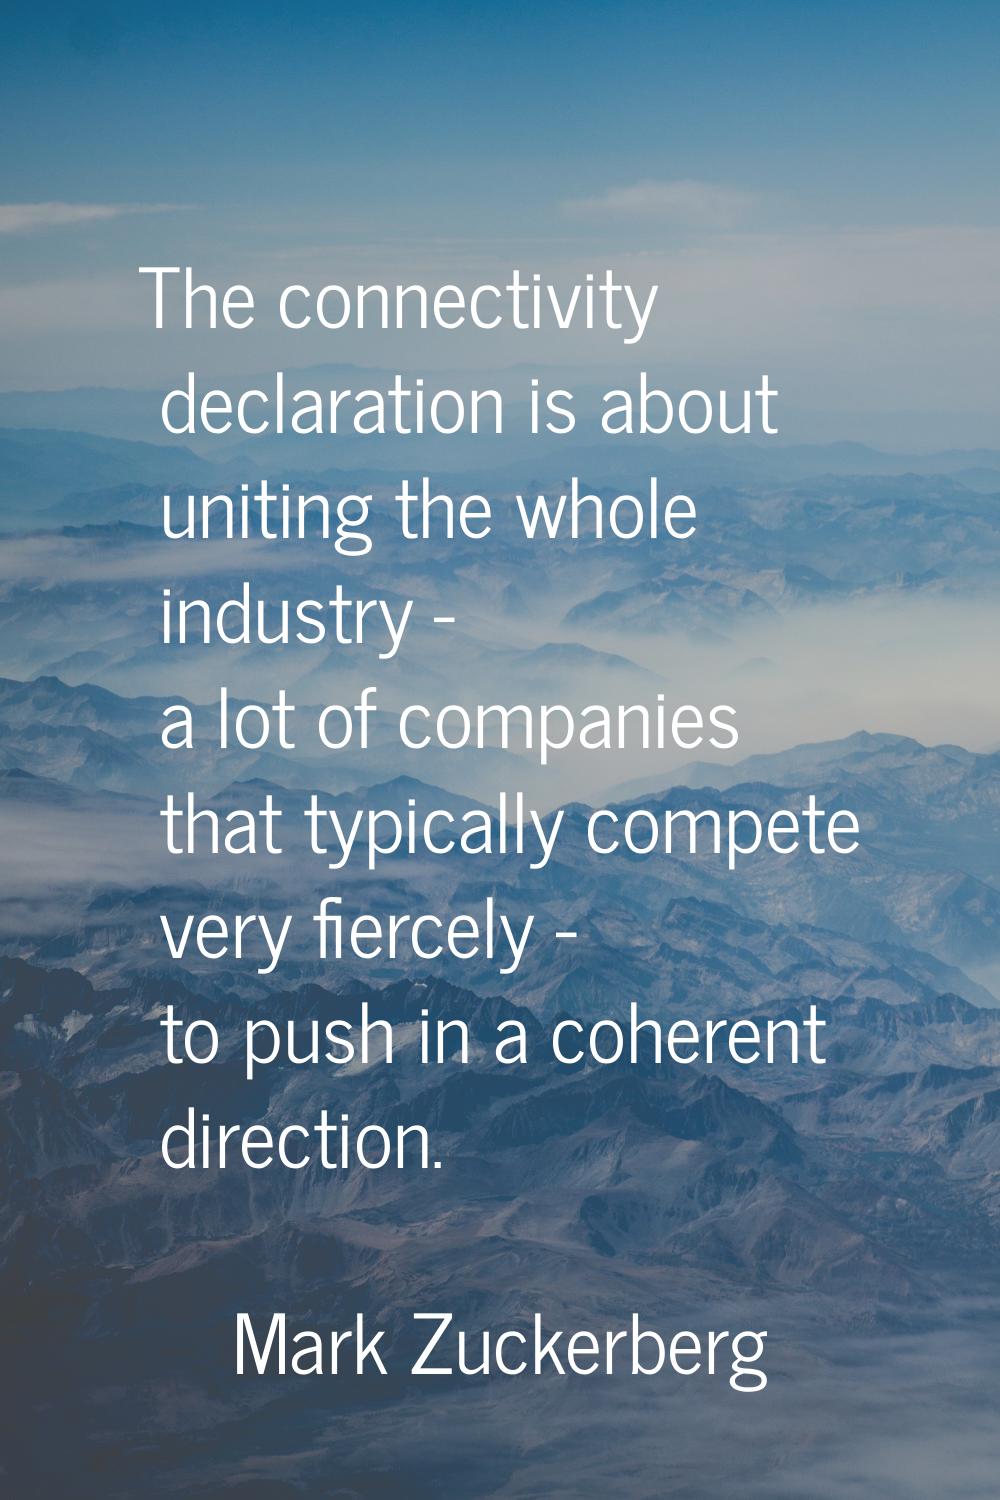 The connectivity declaration is about uniting the whole industry - a lot of companies that typicall